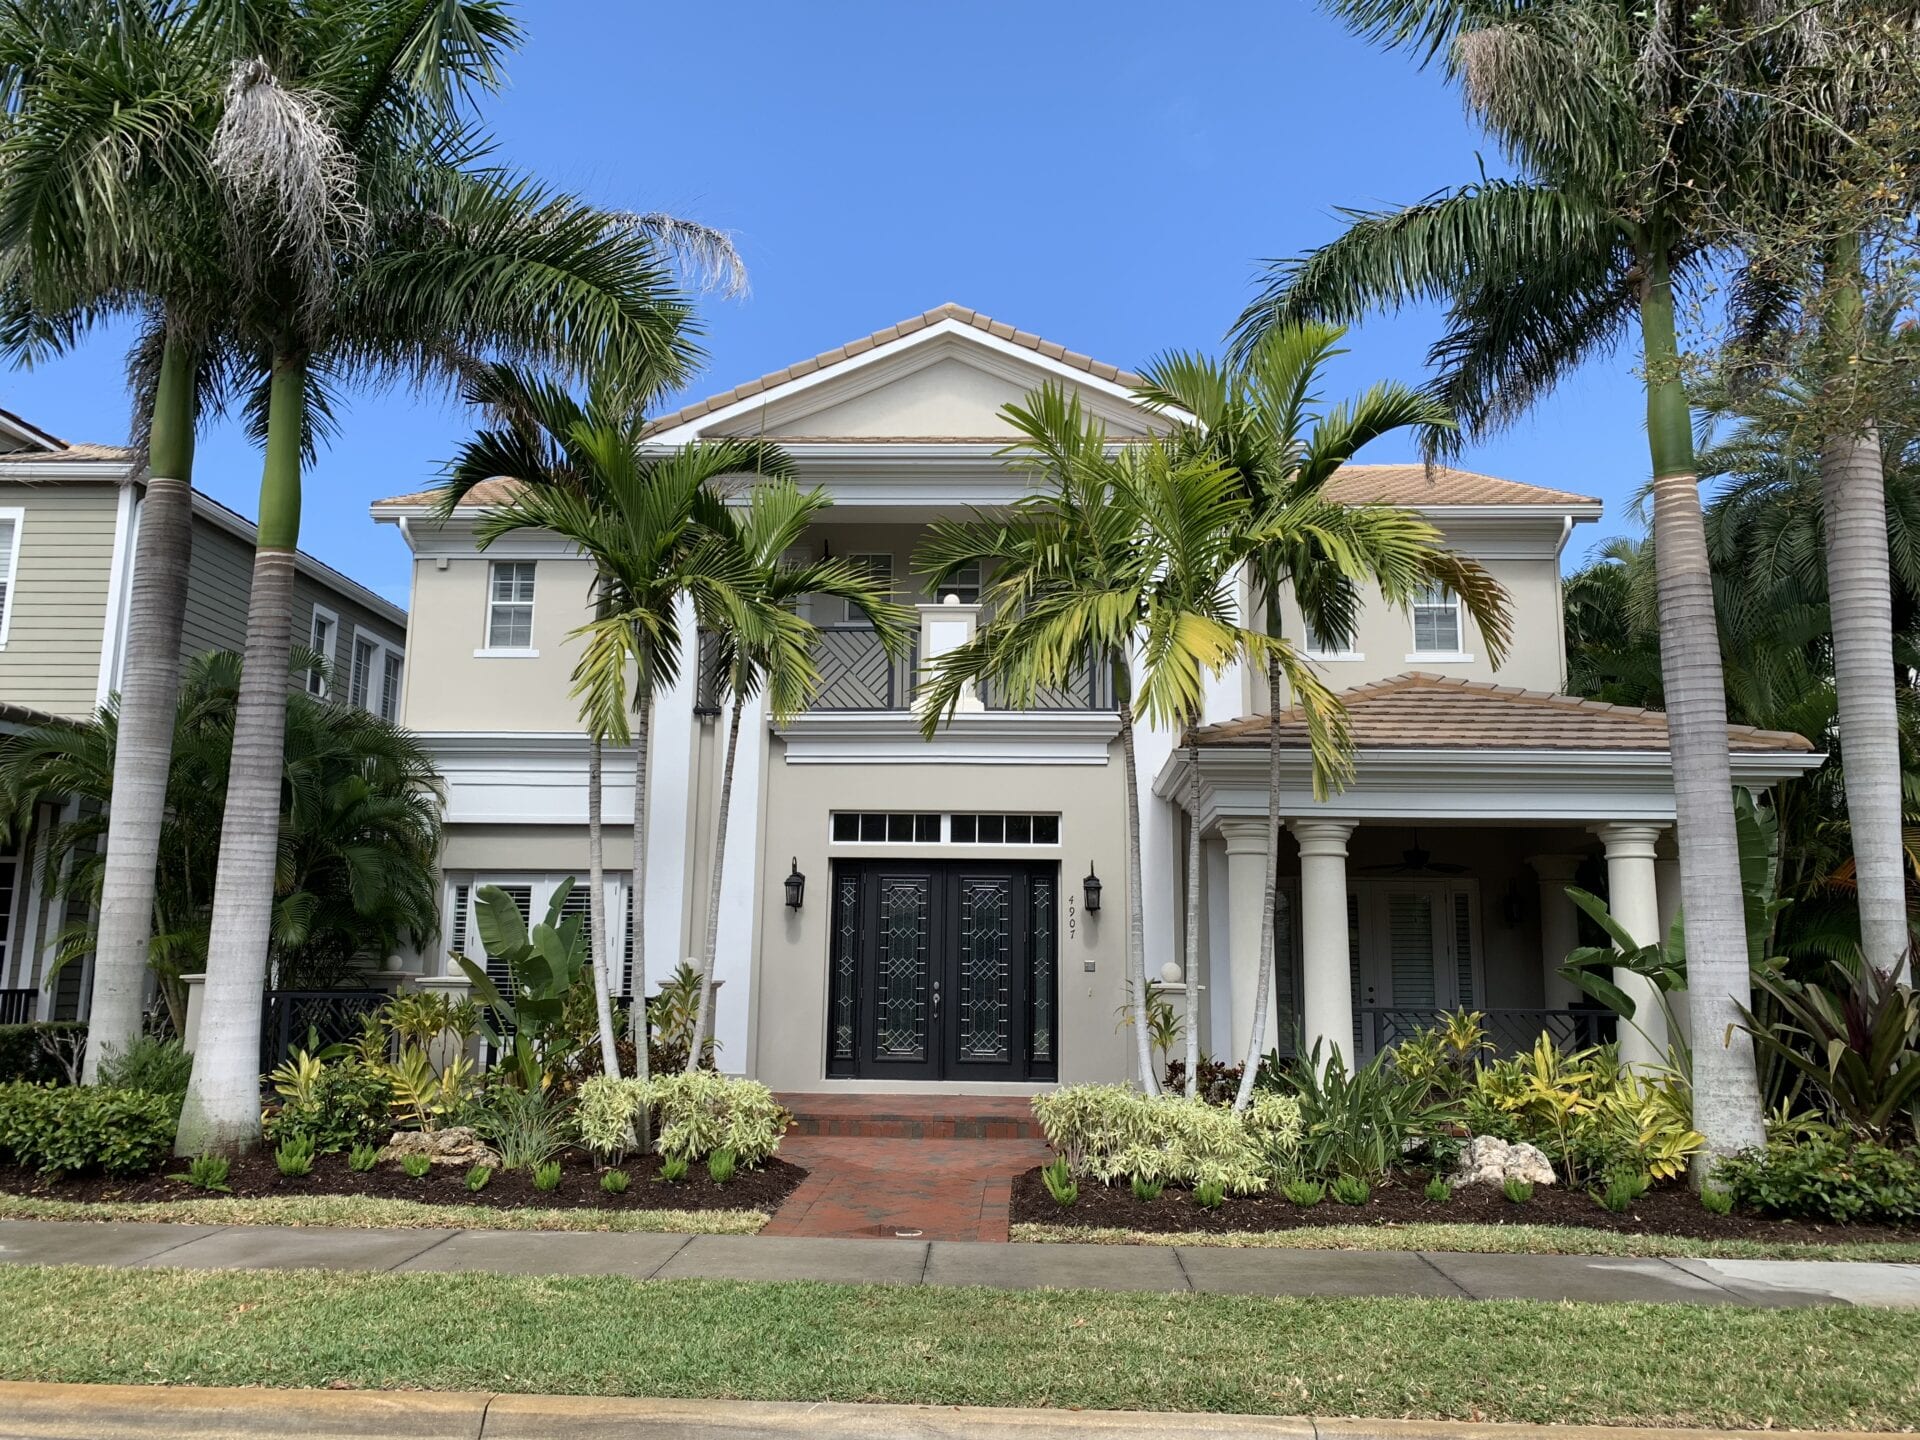 Landscaping Services, Tampa, FL